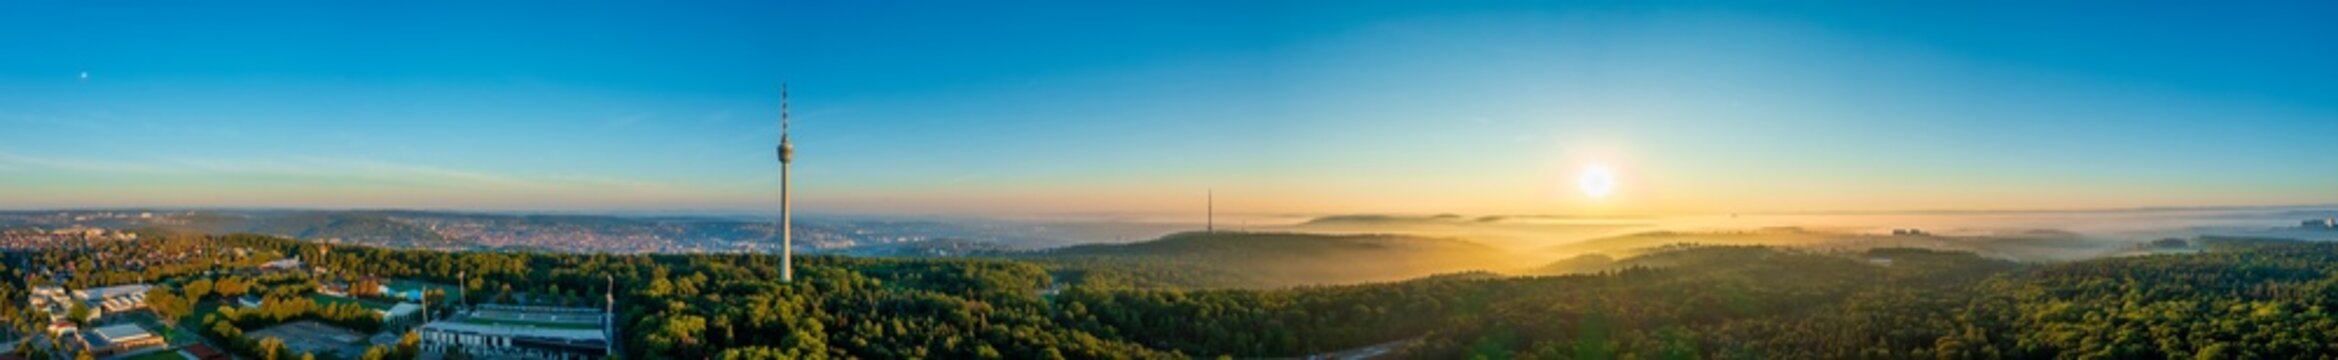 Stuttgart Panorama, Sunrise of the Stuttgart skyline, aerial photo view with tv tower, town architecture, foggy travel photo banner in Germany